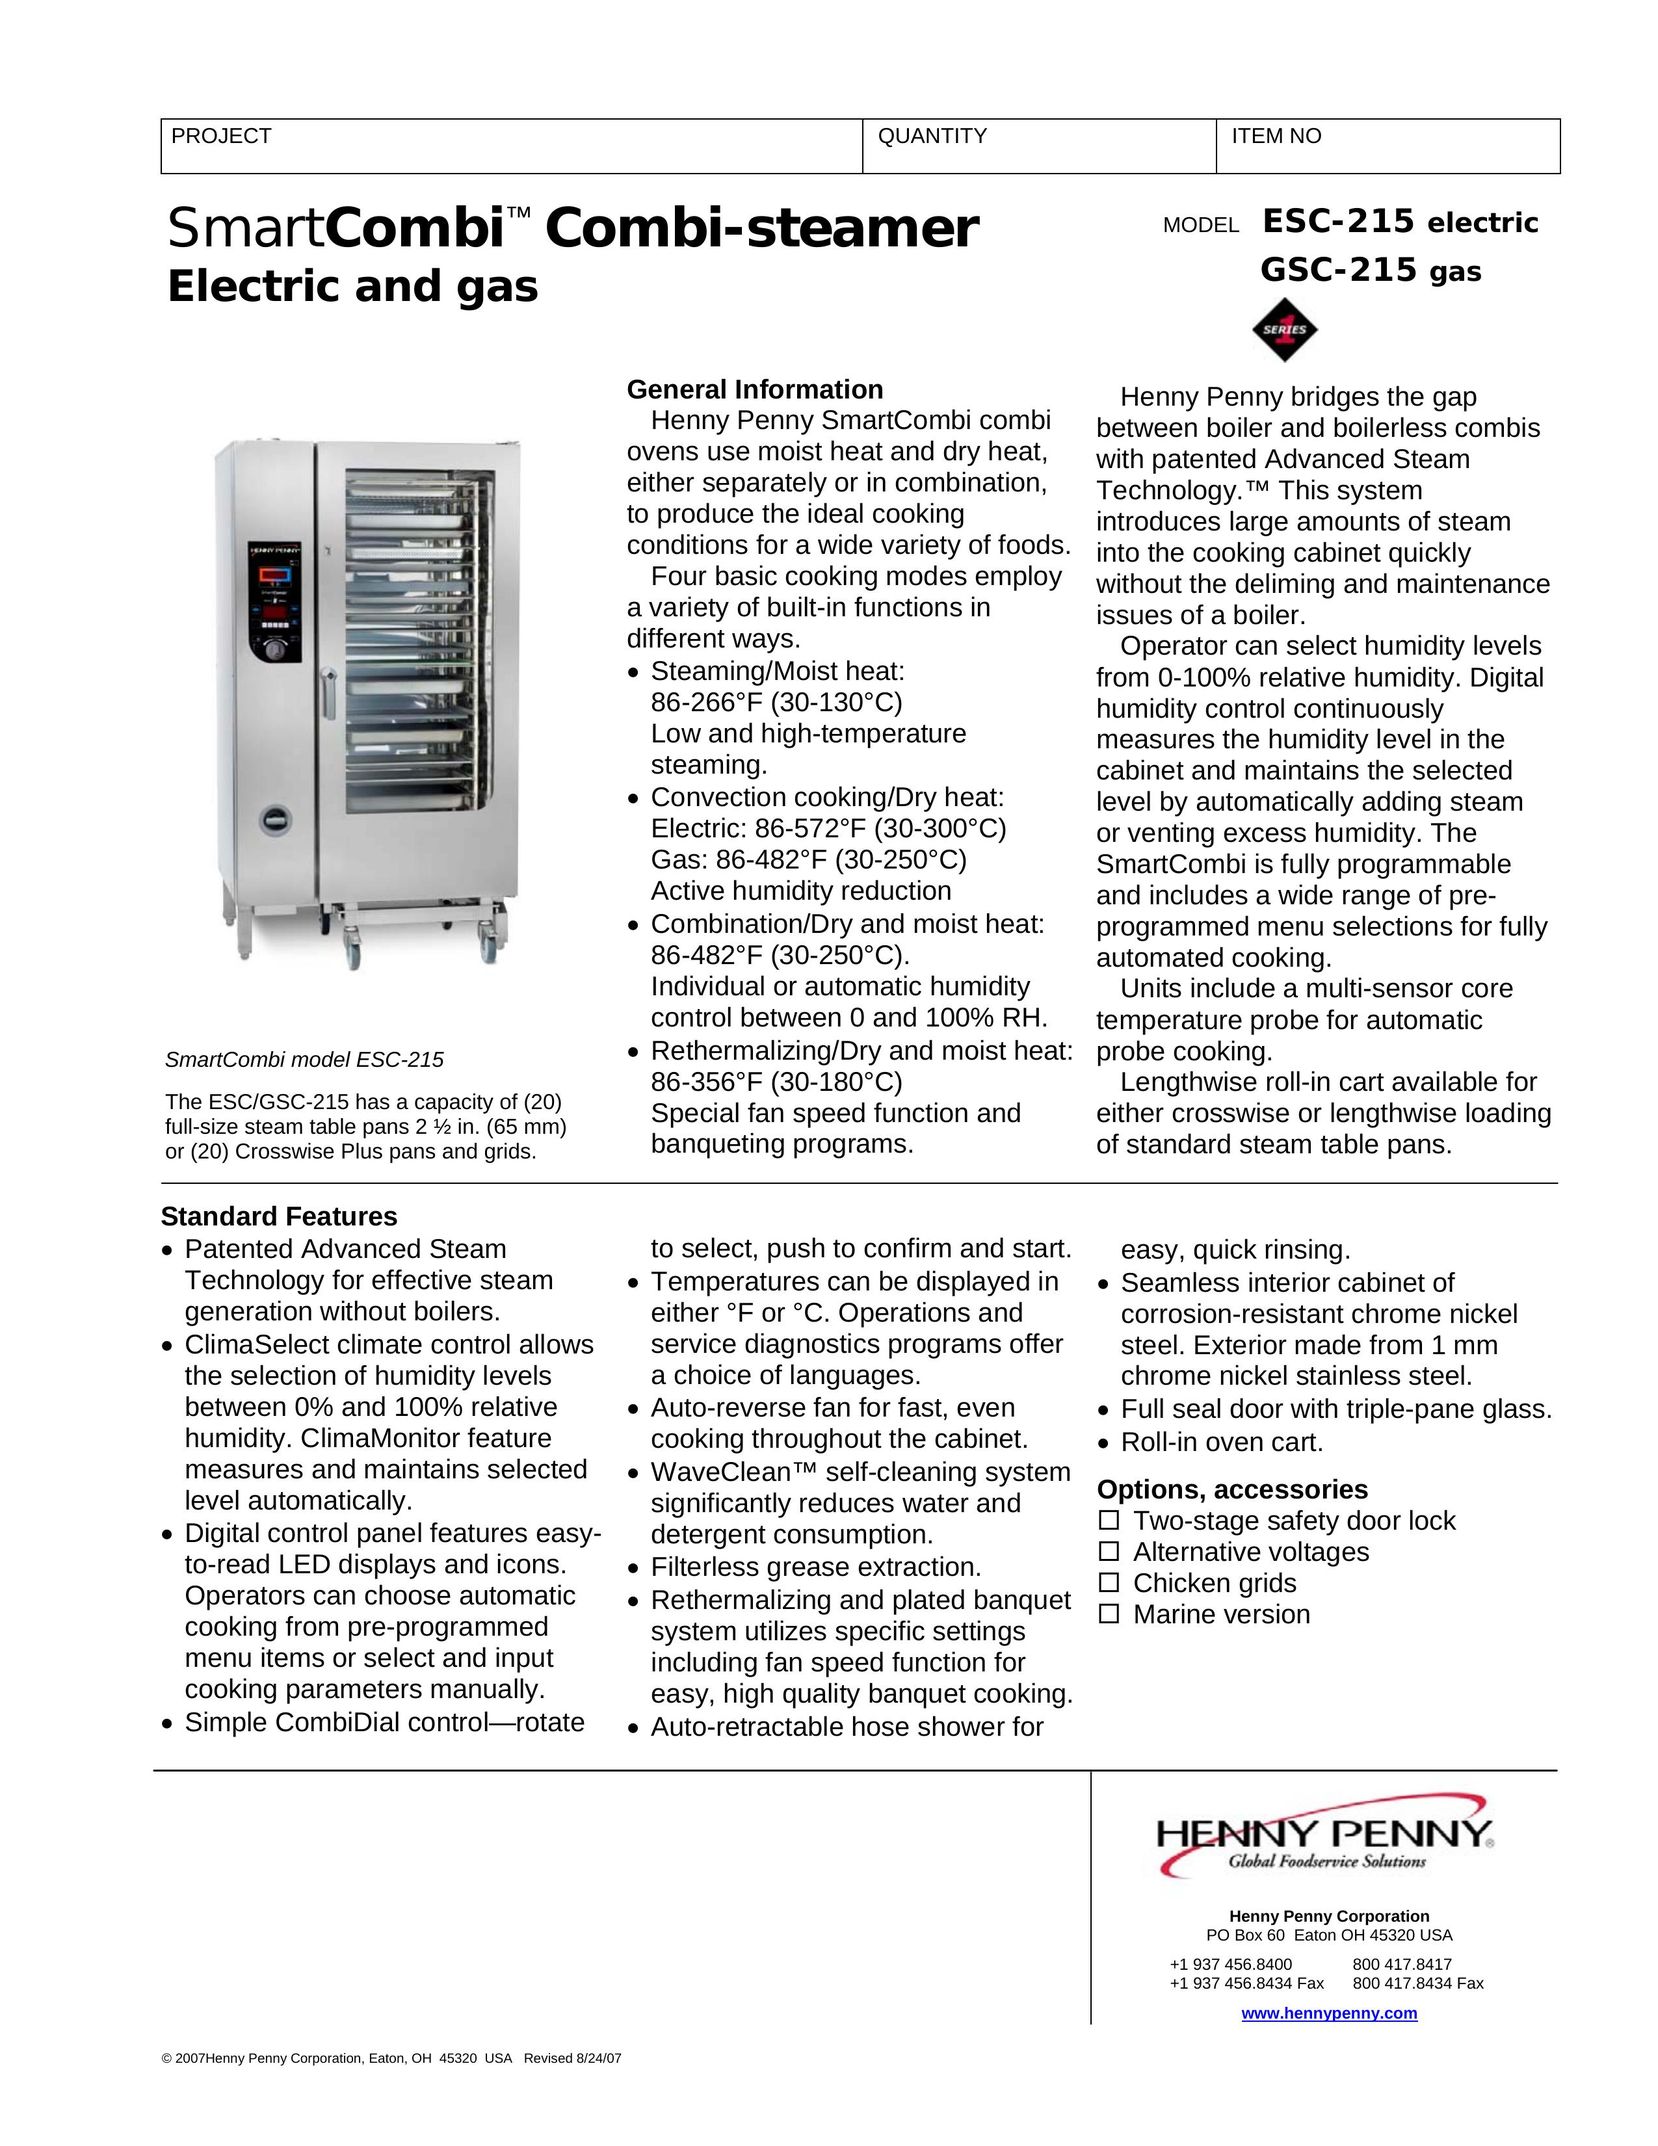 Henny Penny GSC-215 gas Oven User Manual